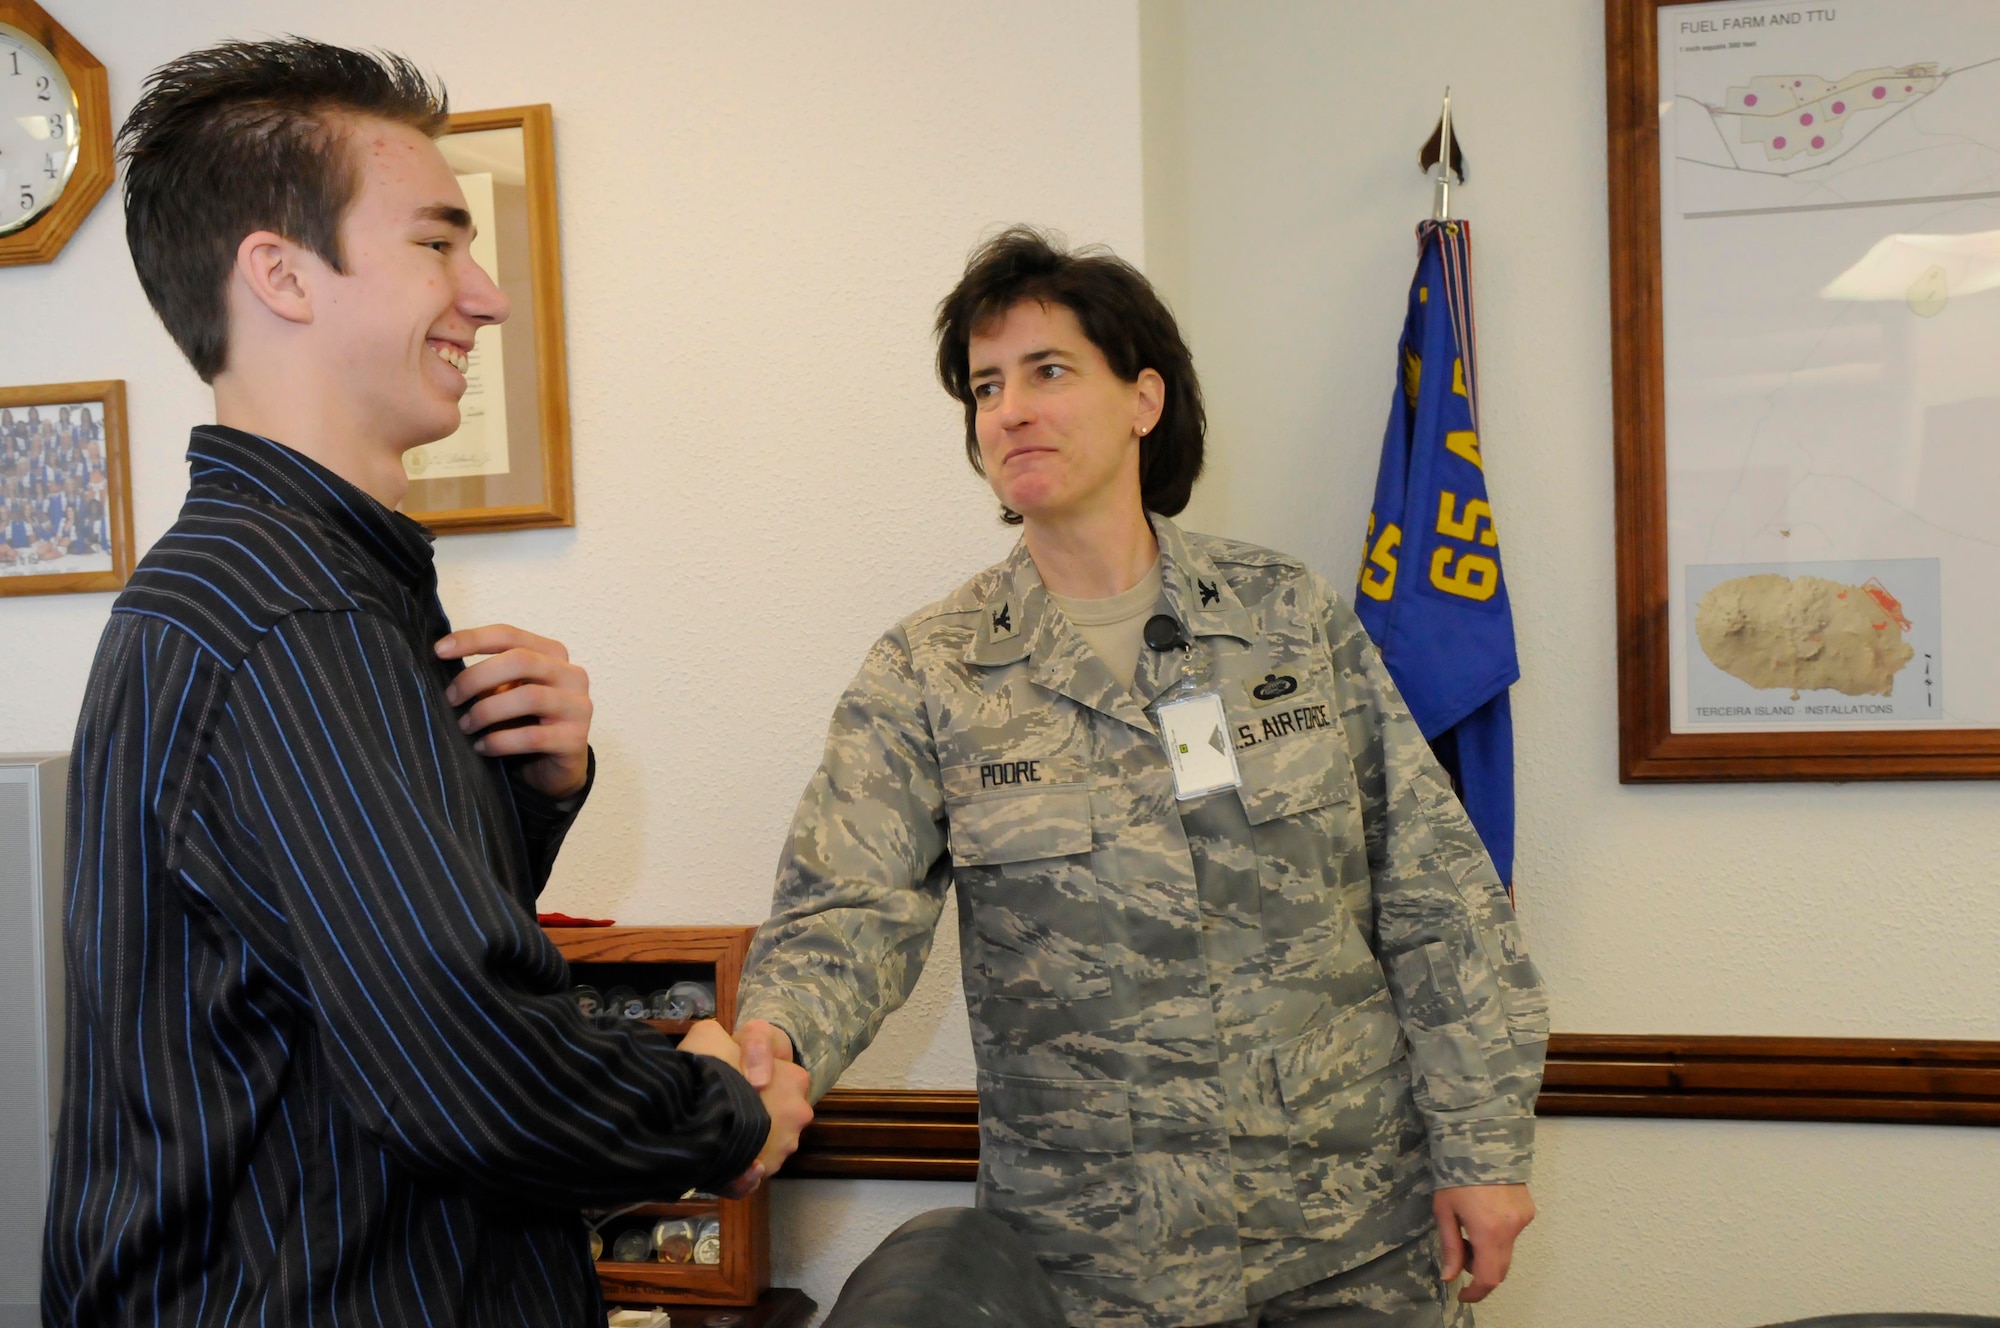 Col. Peggy Poore, 65th Air Base Wing commander, congratulates Michael, son of Chief Master Sgt. Kenneth Longacre of the 65th Mission Support Group, after his oath of enlistment into the Air Force’s Delayed Enlistment Program here Feb. 6. (Photo by Guido Melo)